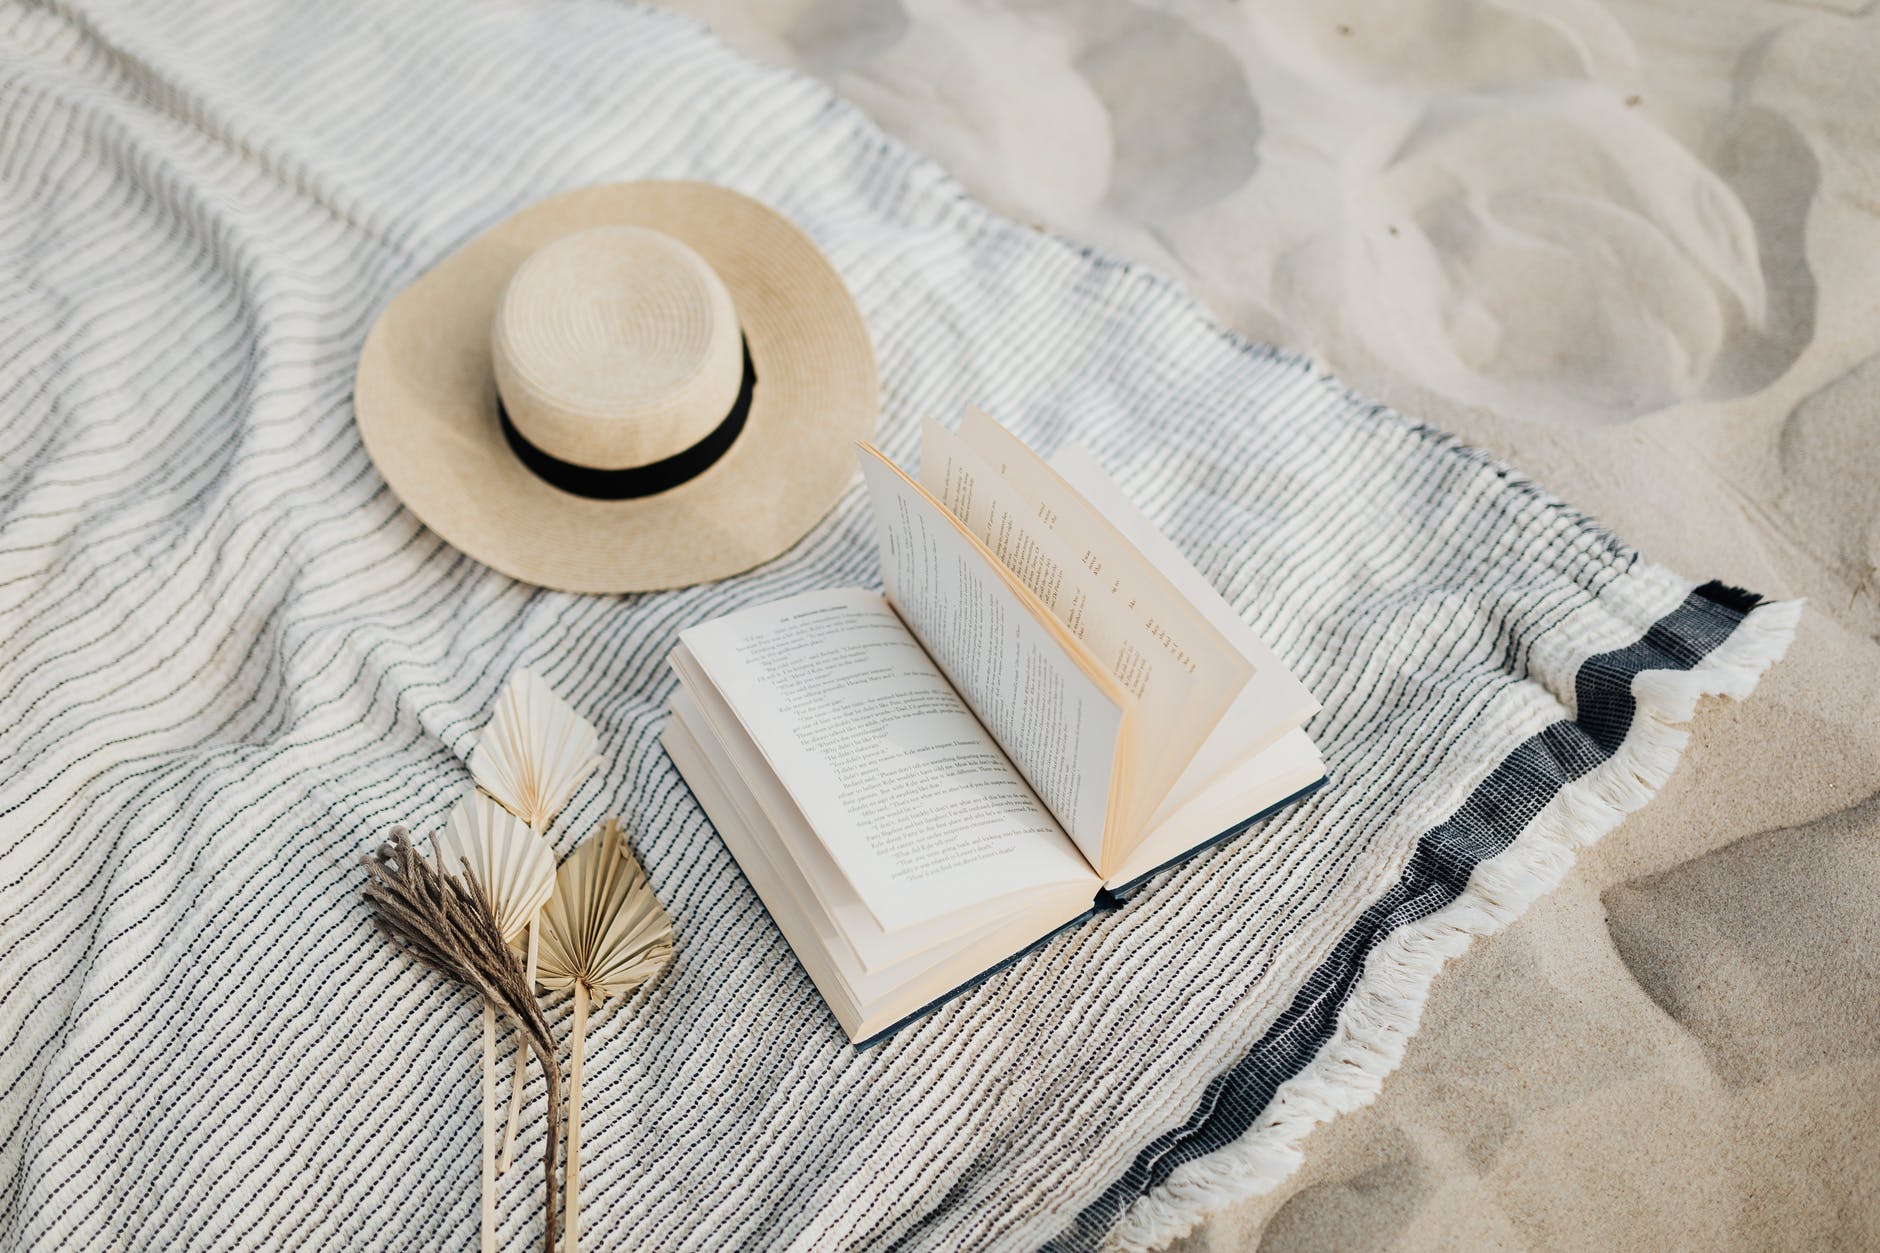 Hat and book on beach towel